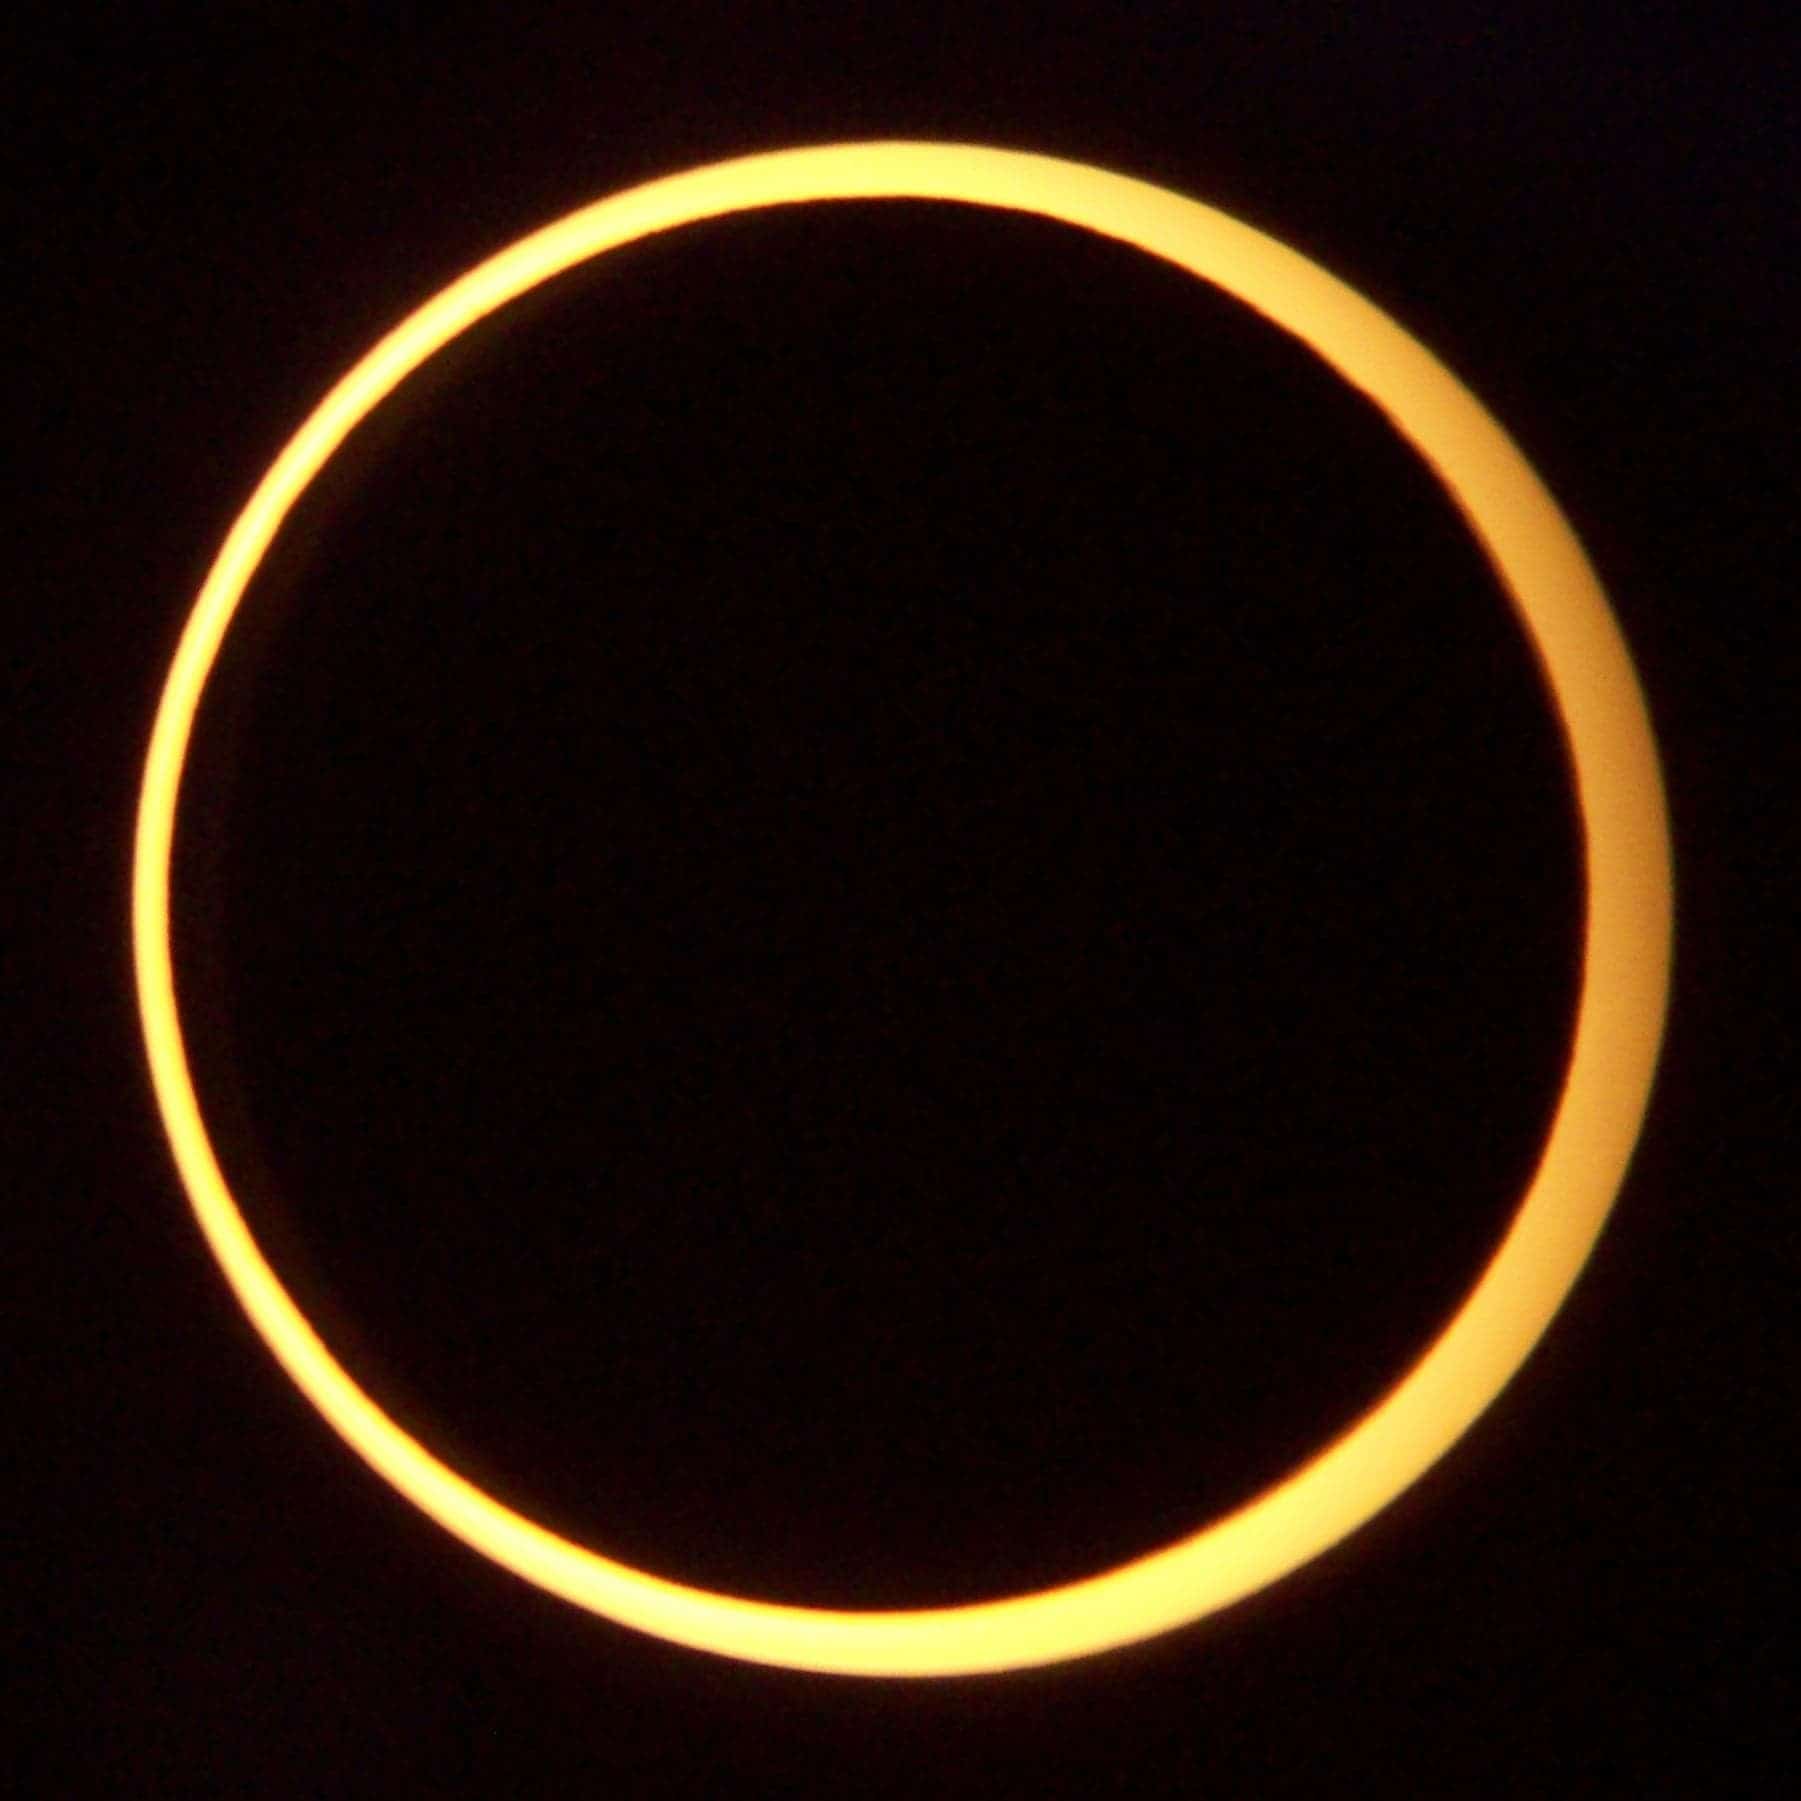 Earliest recorded solar eclipse in 1207 BC helps researchers date